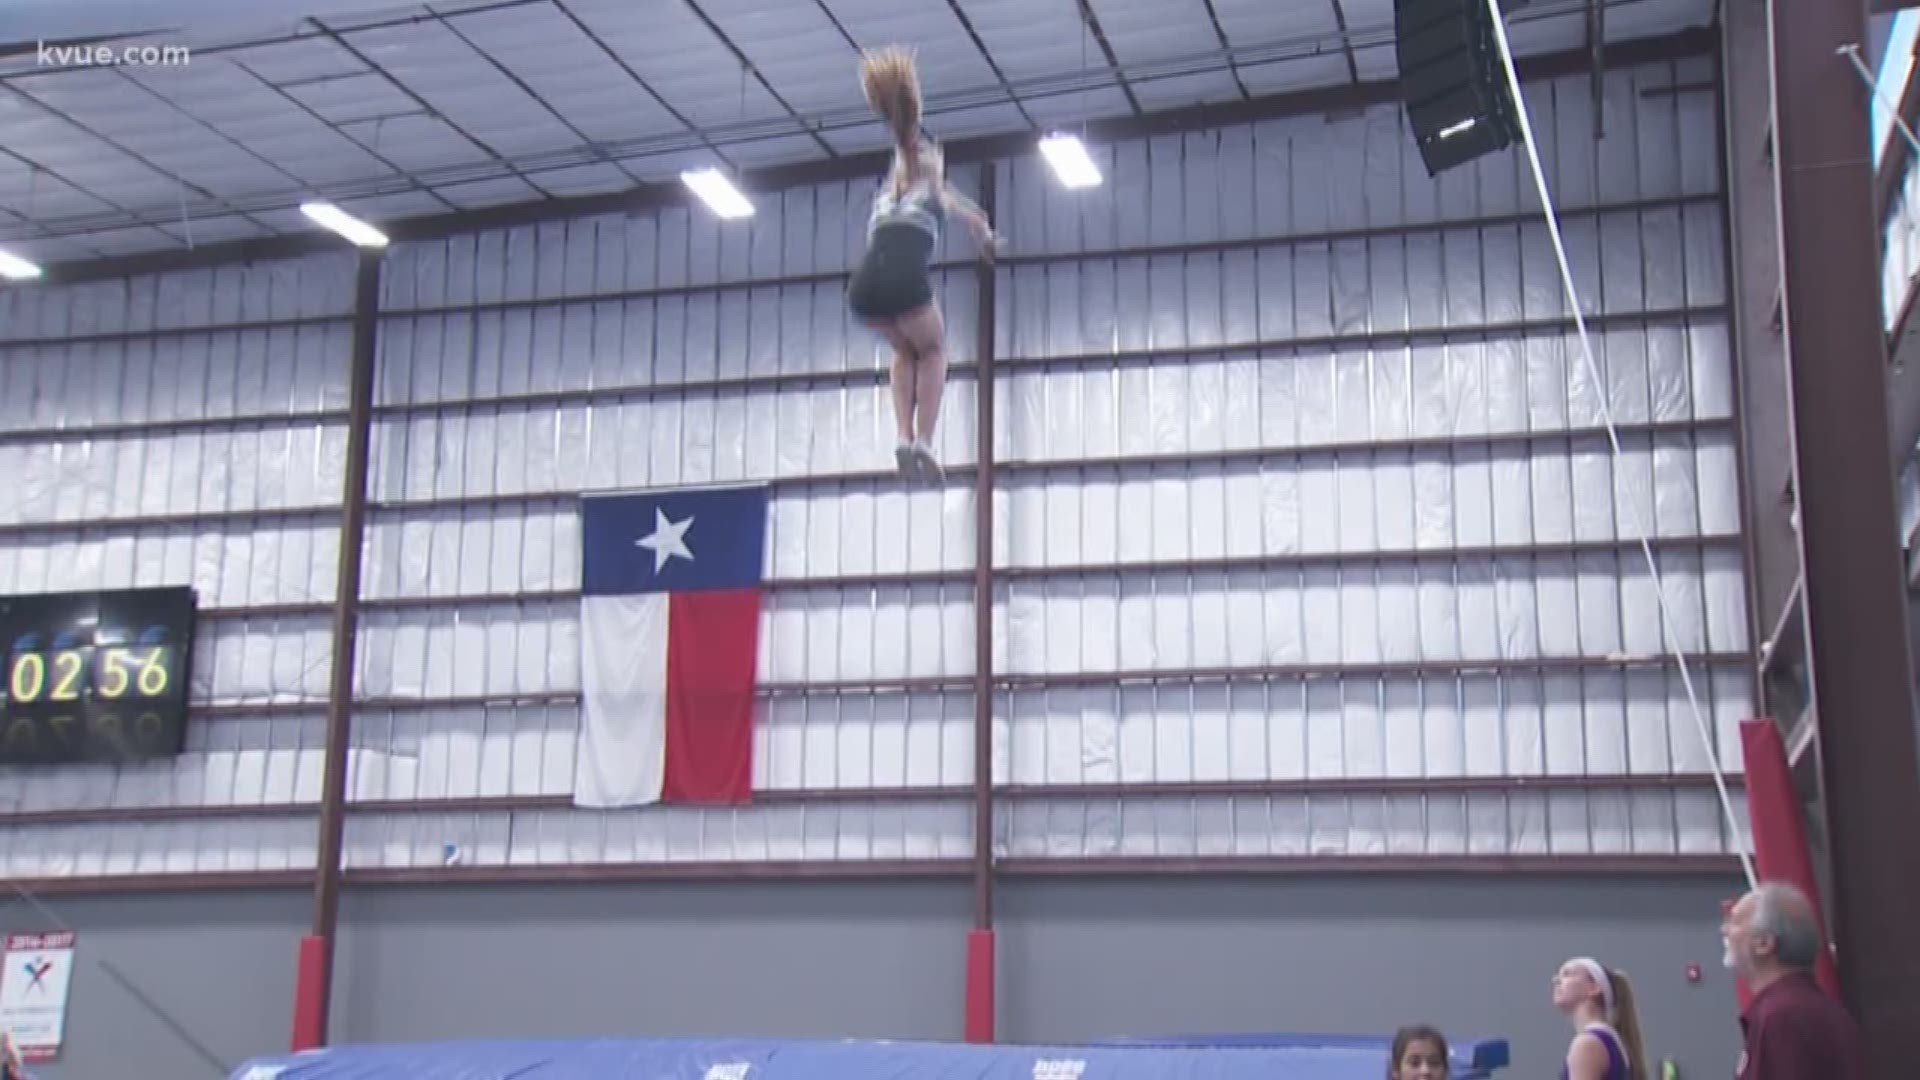 Sky's the limit for Austin-area trampoline, tumbling champ with Olympic  potential